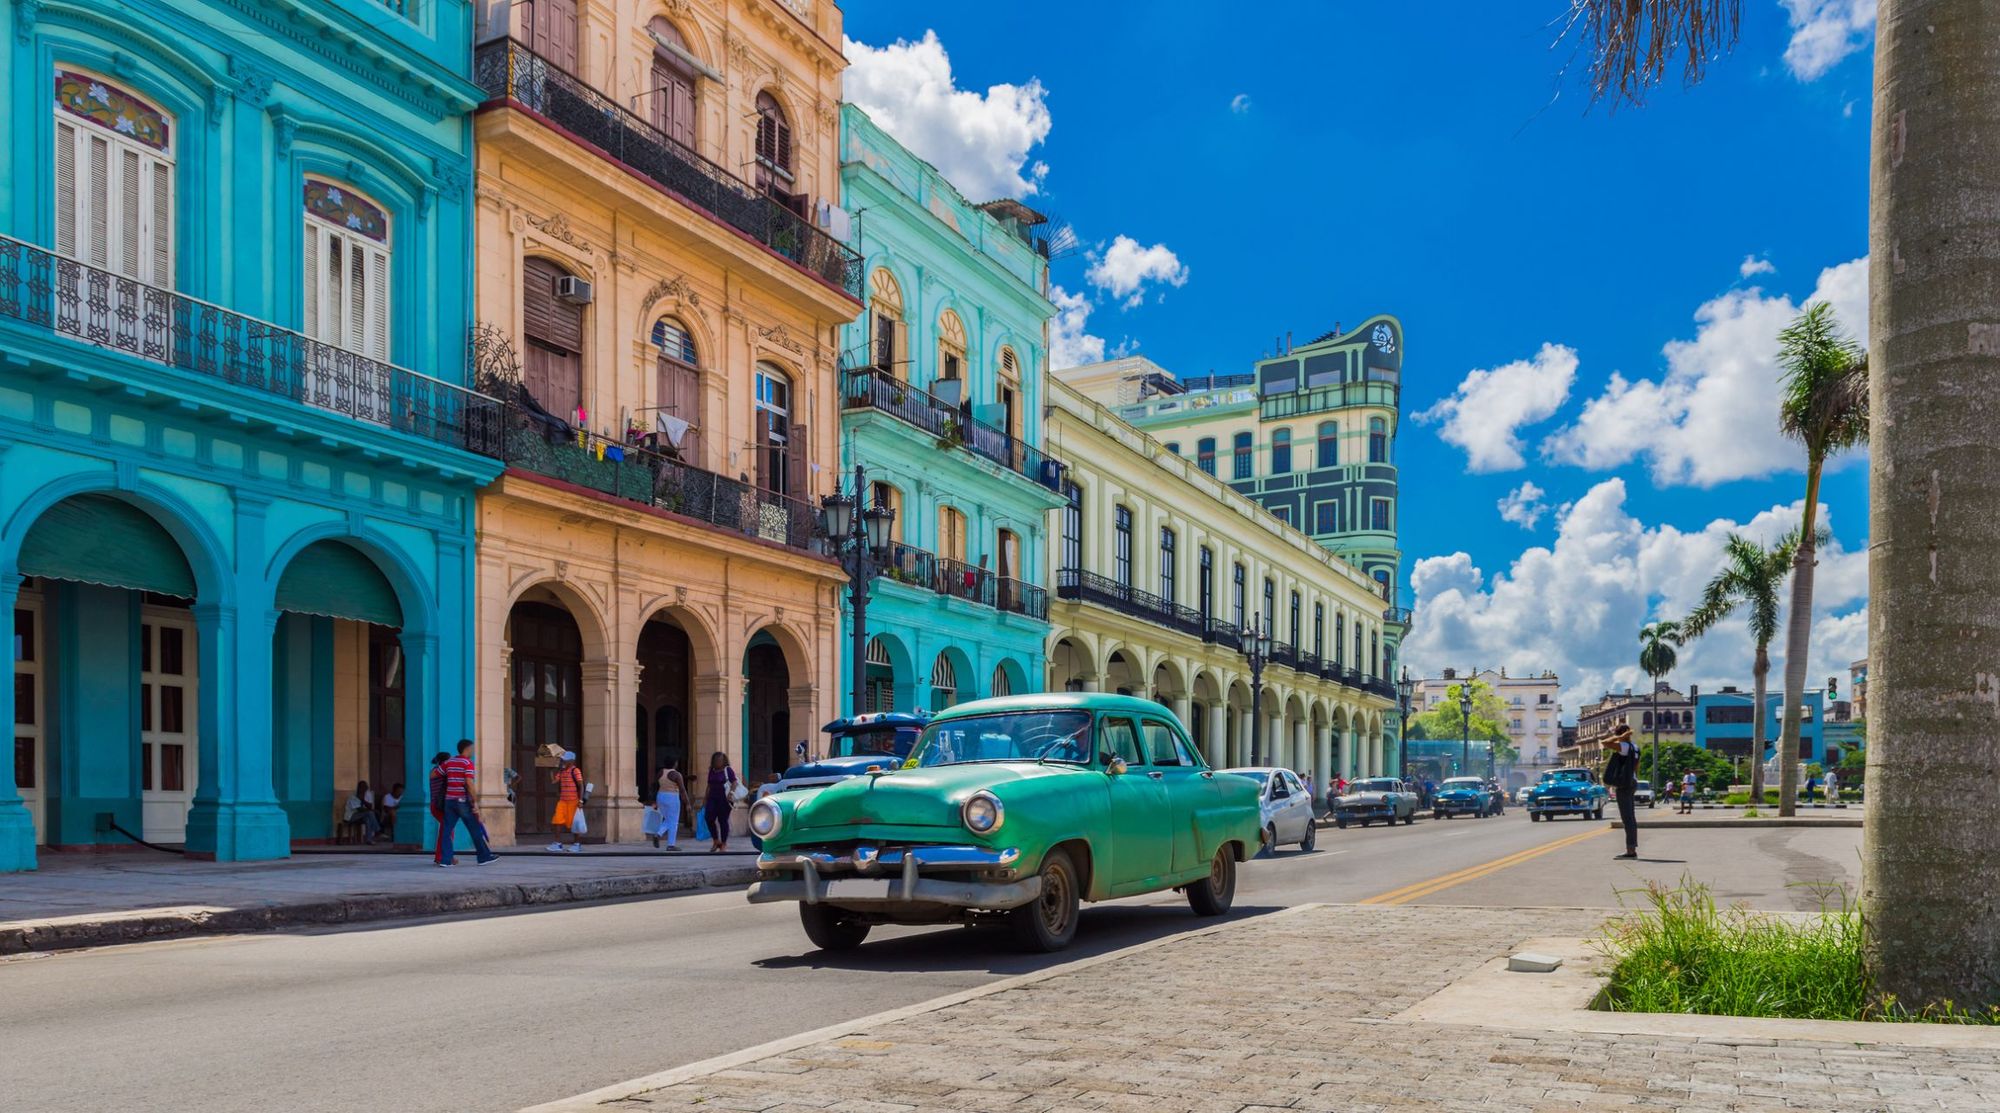 A typical scene in Havana, the Cuban capital, as a vintage American car drives past brightly coloured buildings. Photo: Getty